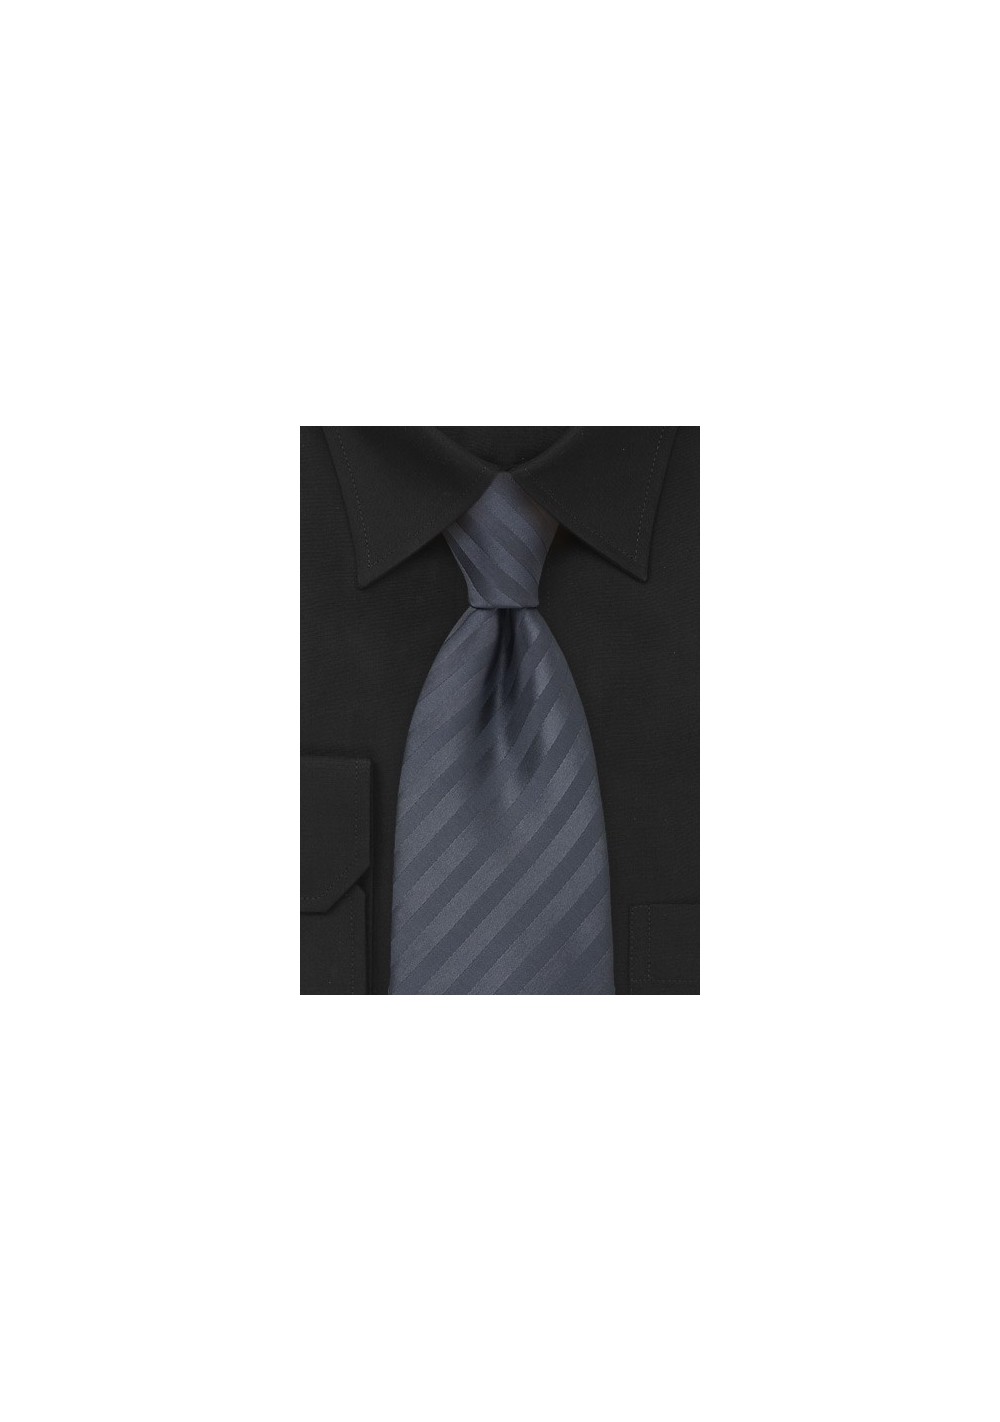 Charcoal Gray Striped Tie